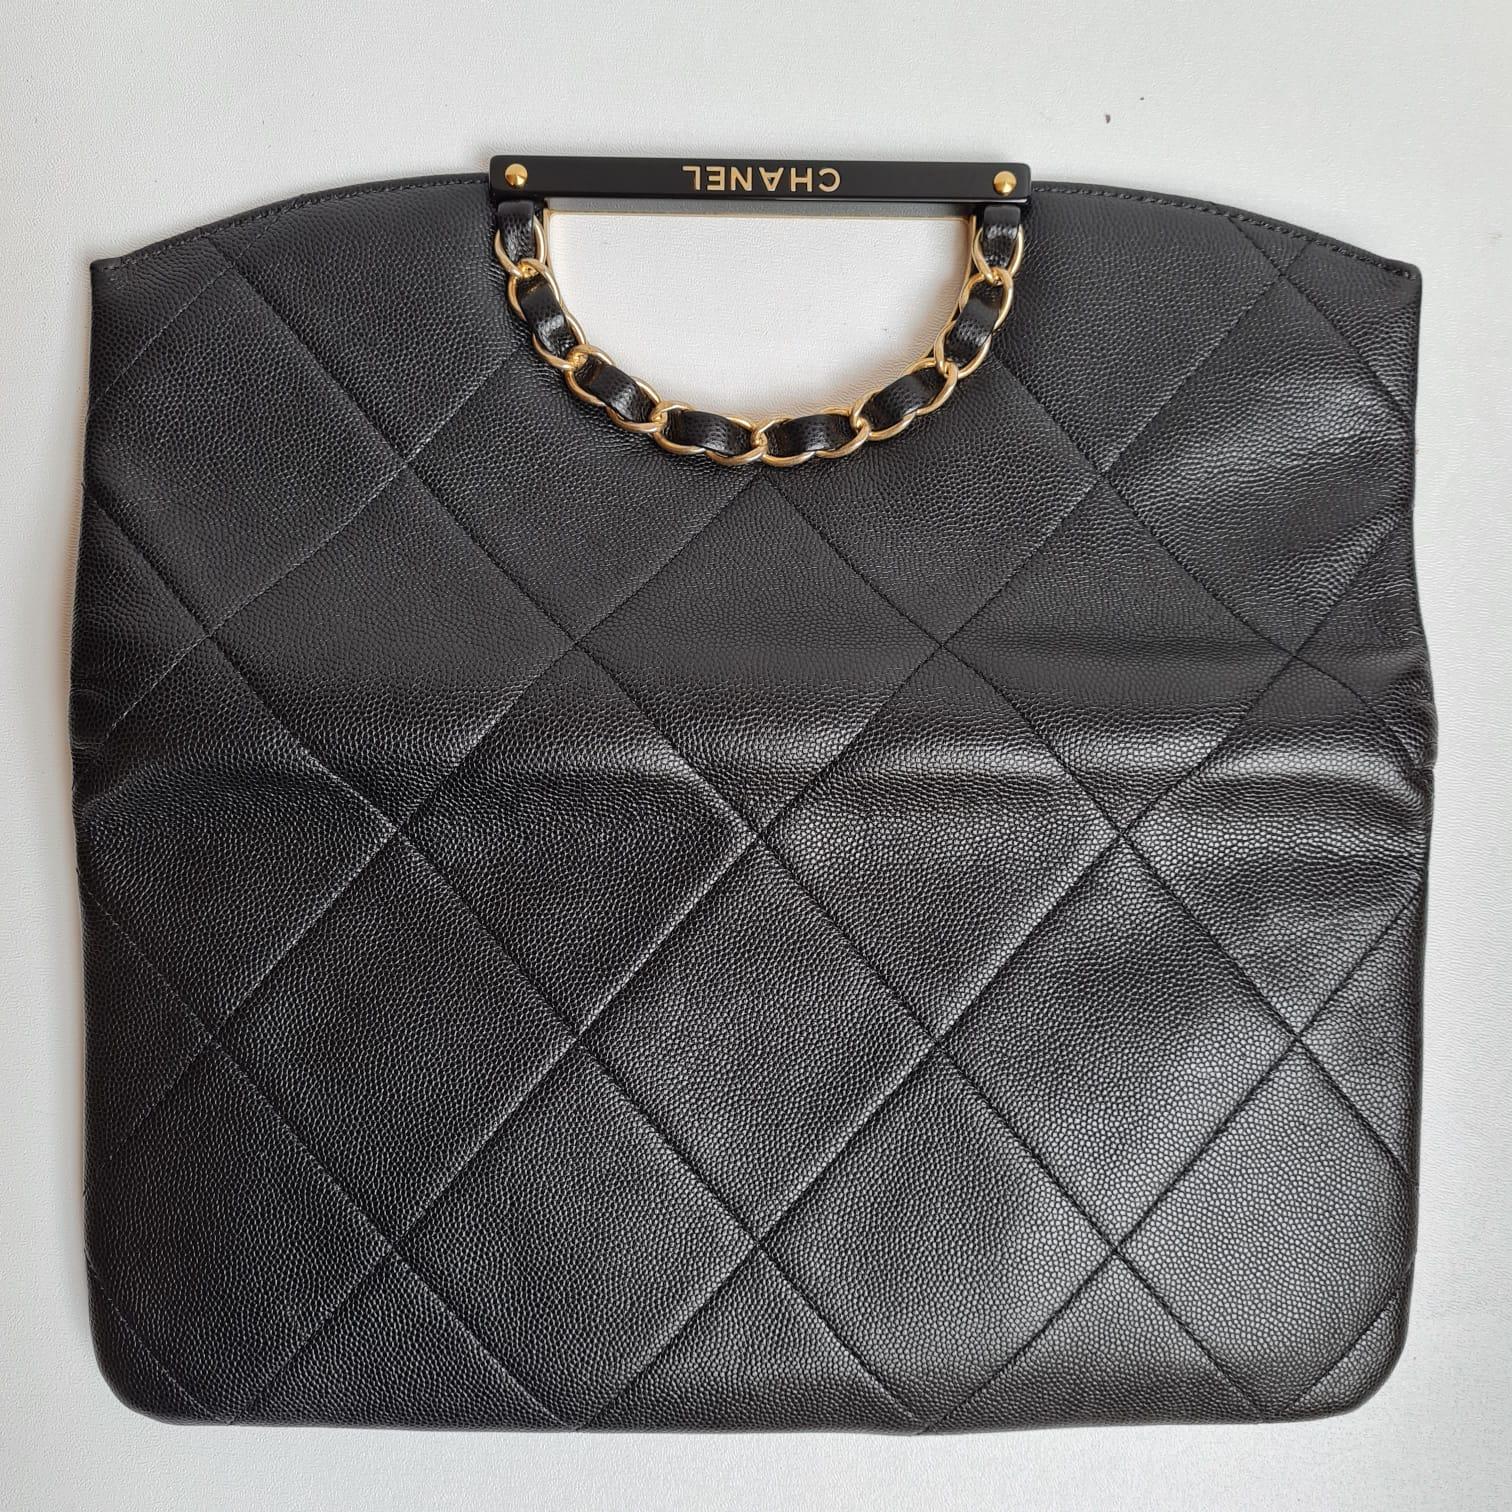 Excellent condition Chanel chain handle flap clutch. Overall still in excellent condition with light wear marks. Serial number #29. Comes with dust bag.